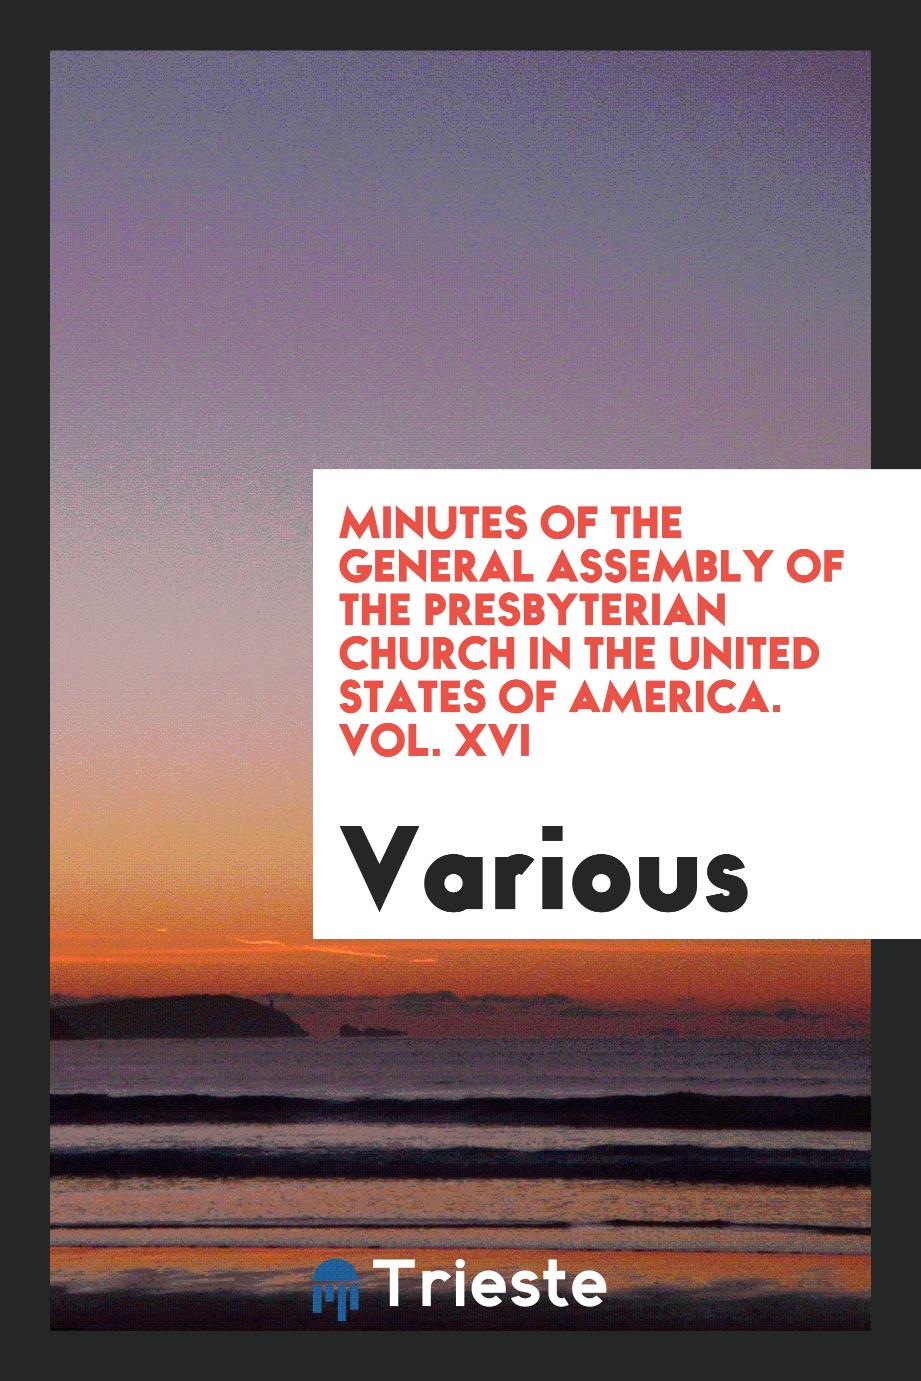 Minutes of the General Assembly of the Presbyterian Church in the United States of America. Vol. XVI